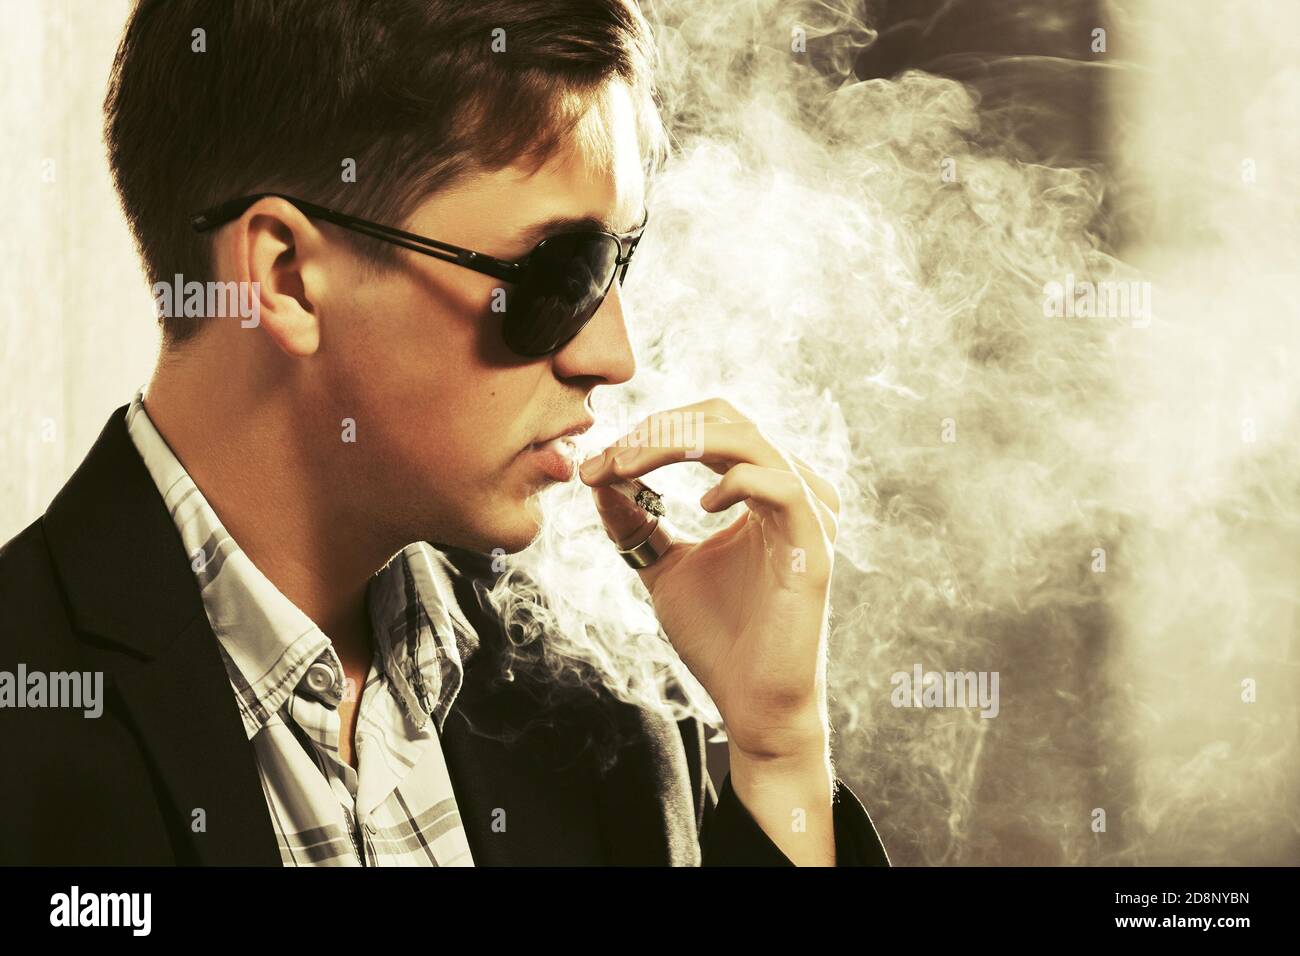 Young man in sunglasses smoking a cigarette on city street  Stylish fashion male model in black suit jacket Stock Photo